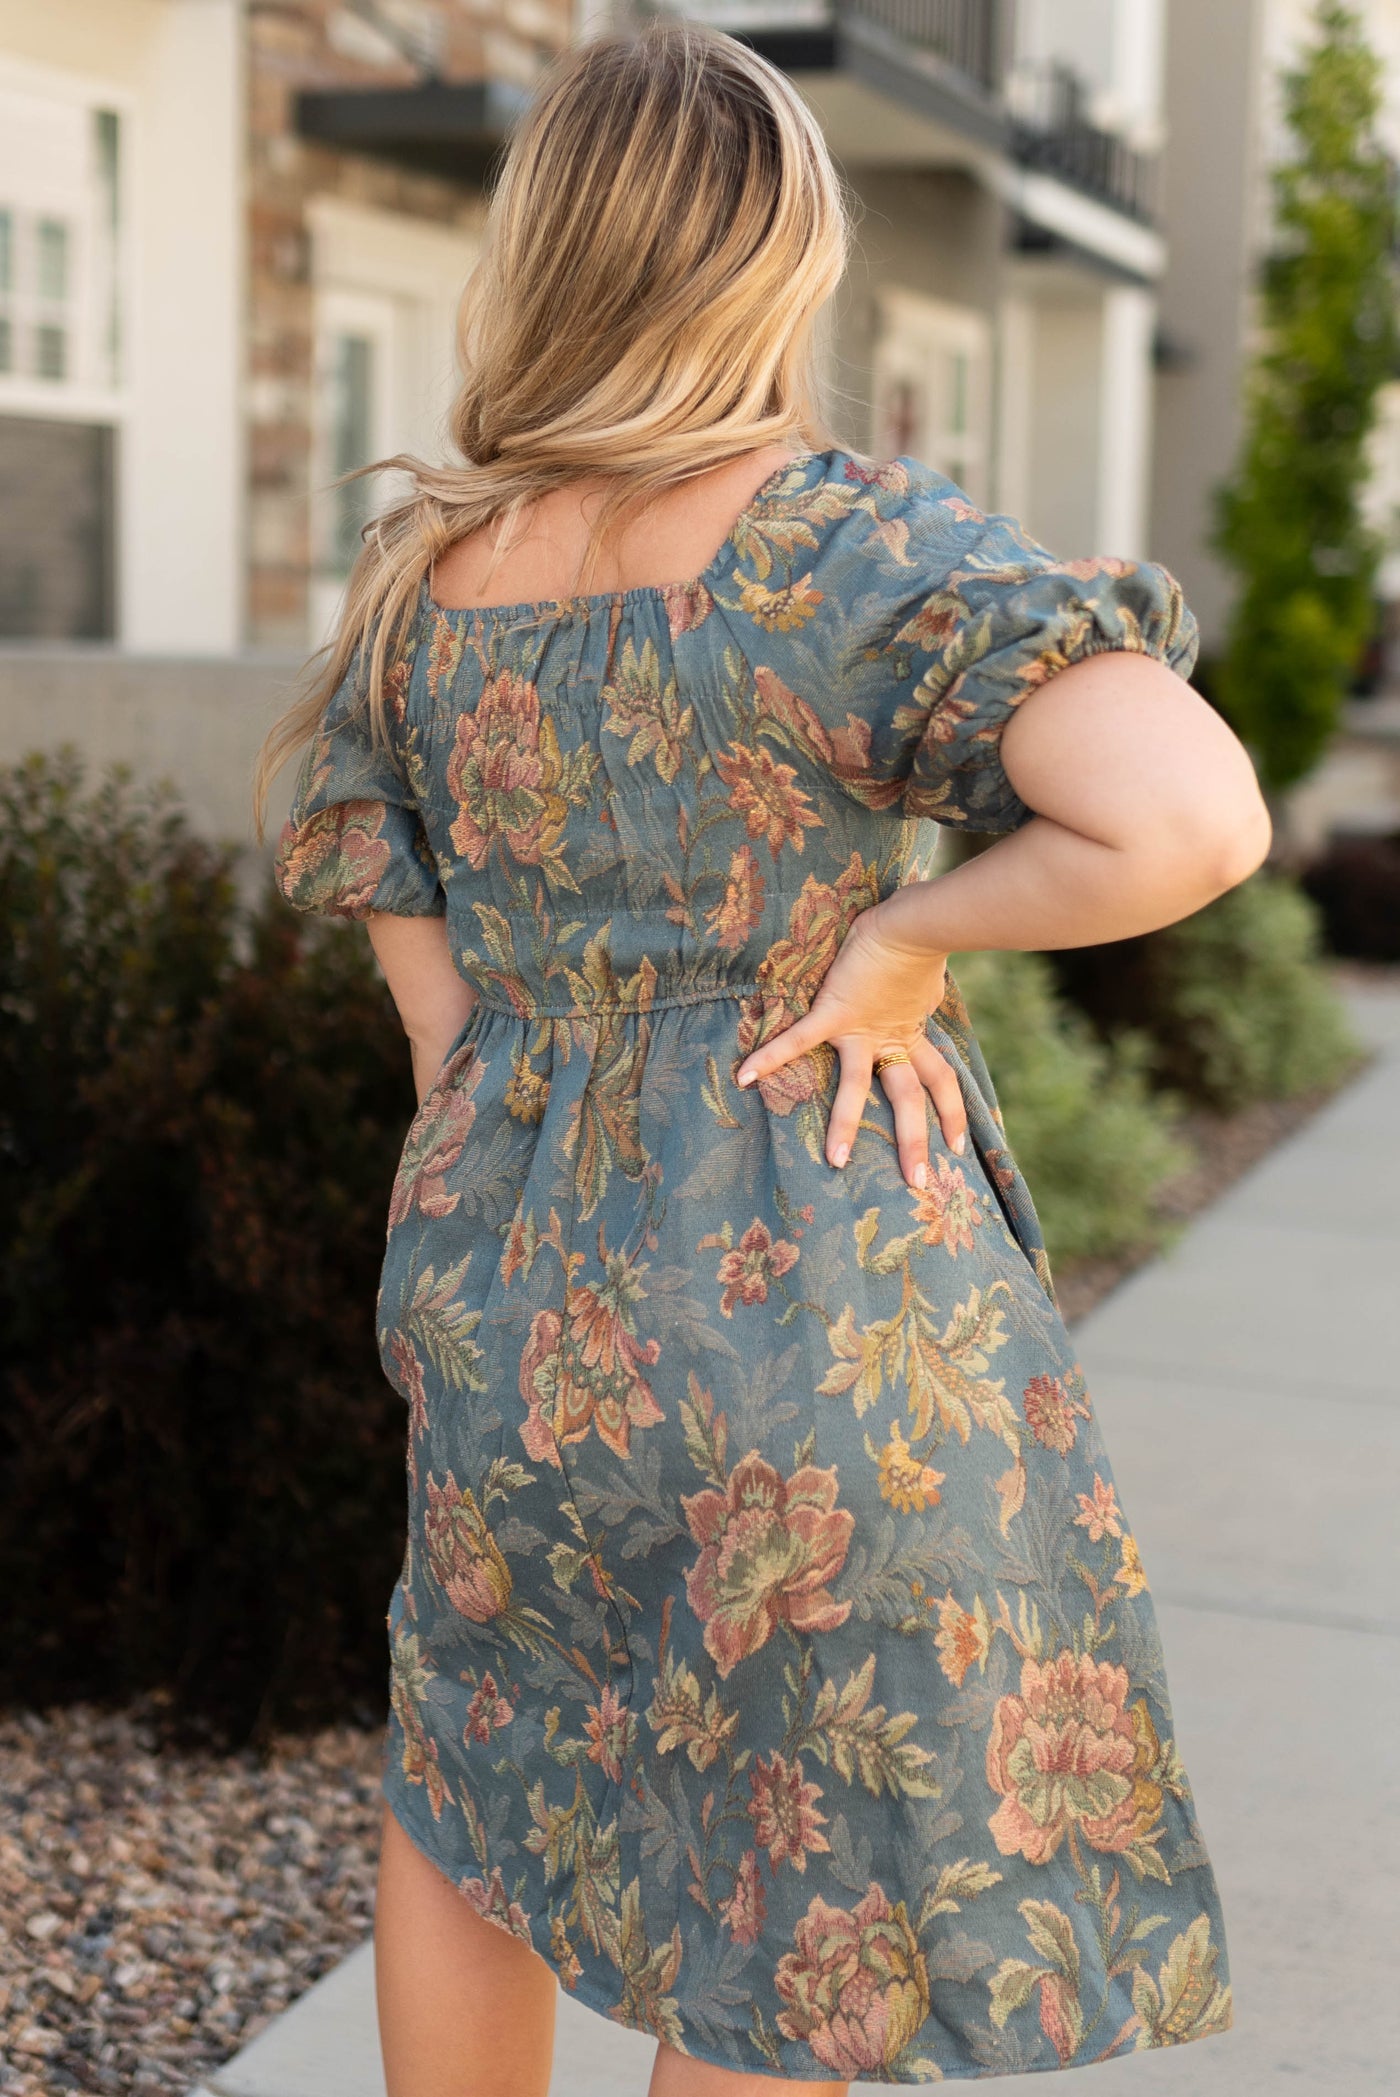 Back view of a teal floral dress